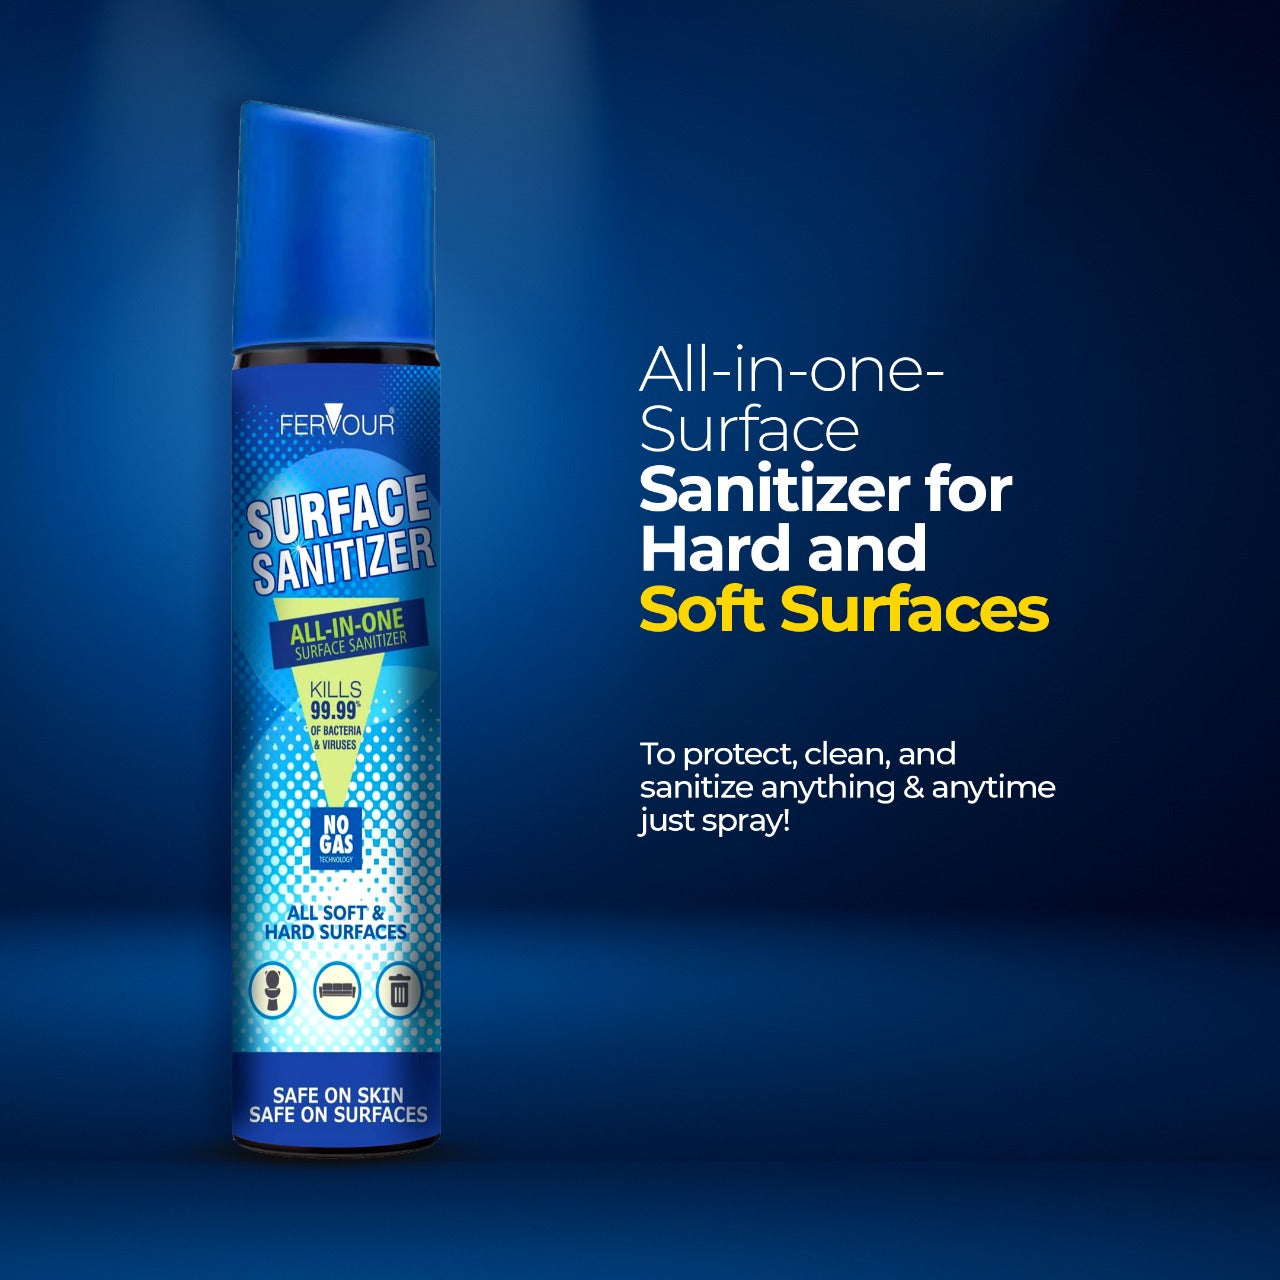 All-in-one- Surface Sanitizer for Hard and Soft Surfaces 200ml